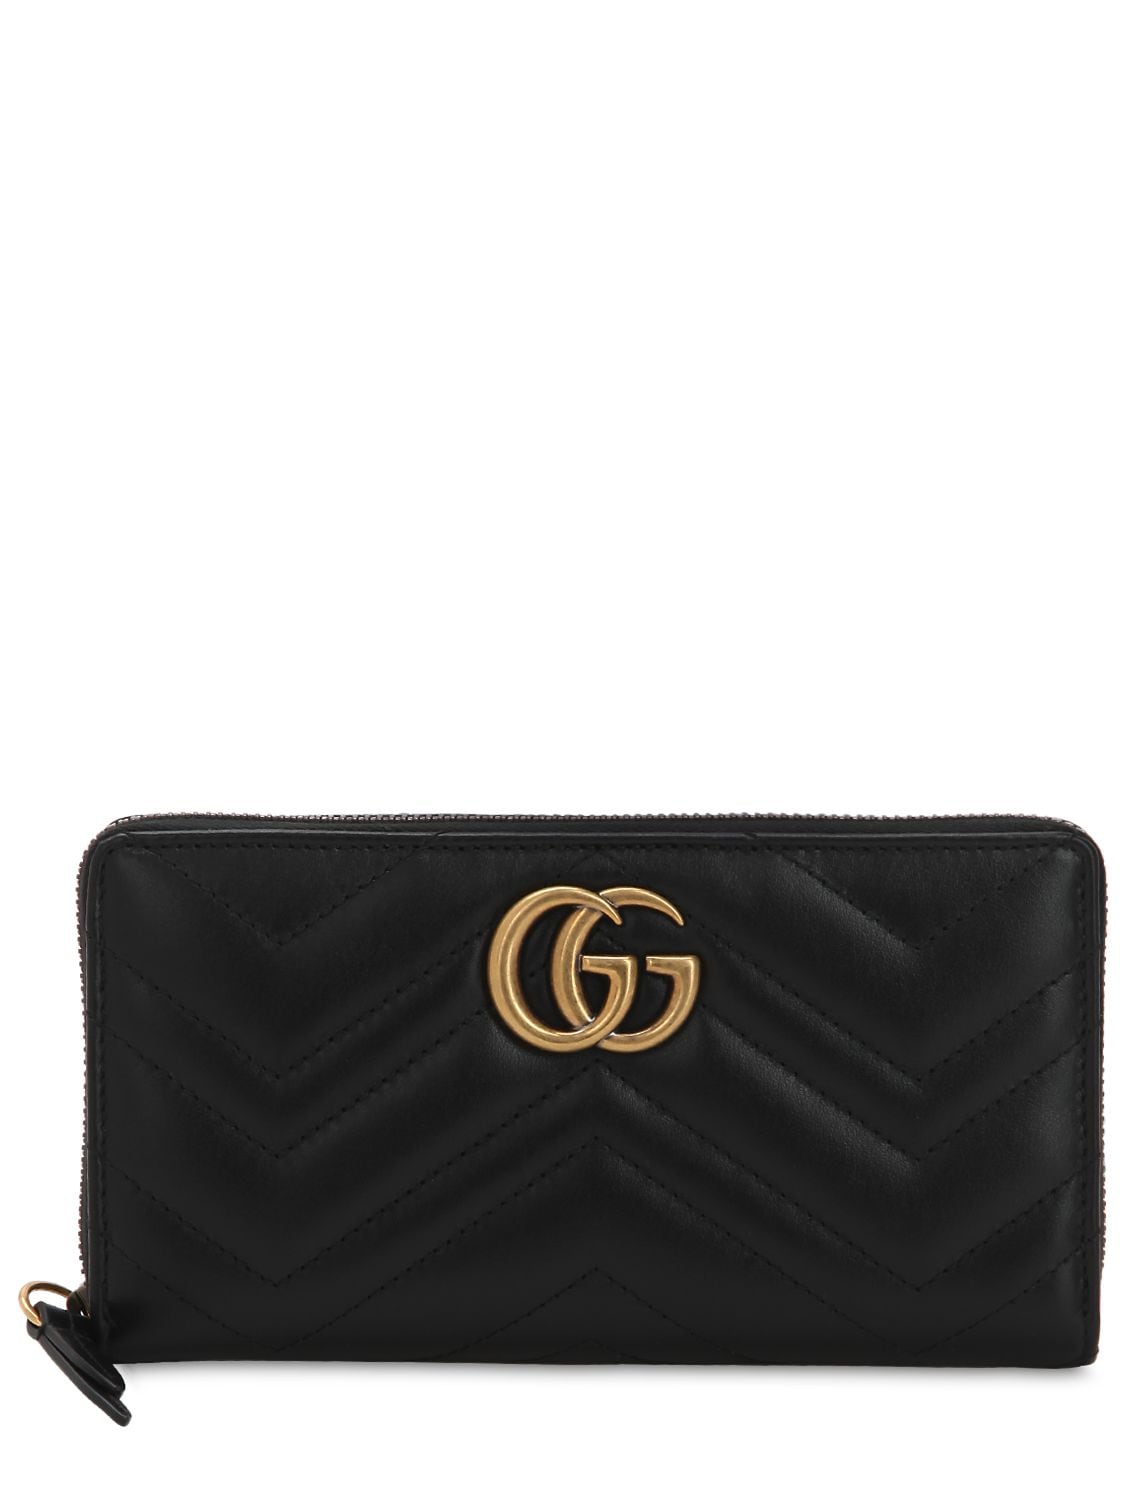 GUCCI Gg Marmont Quilted Leather Wallet